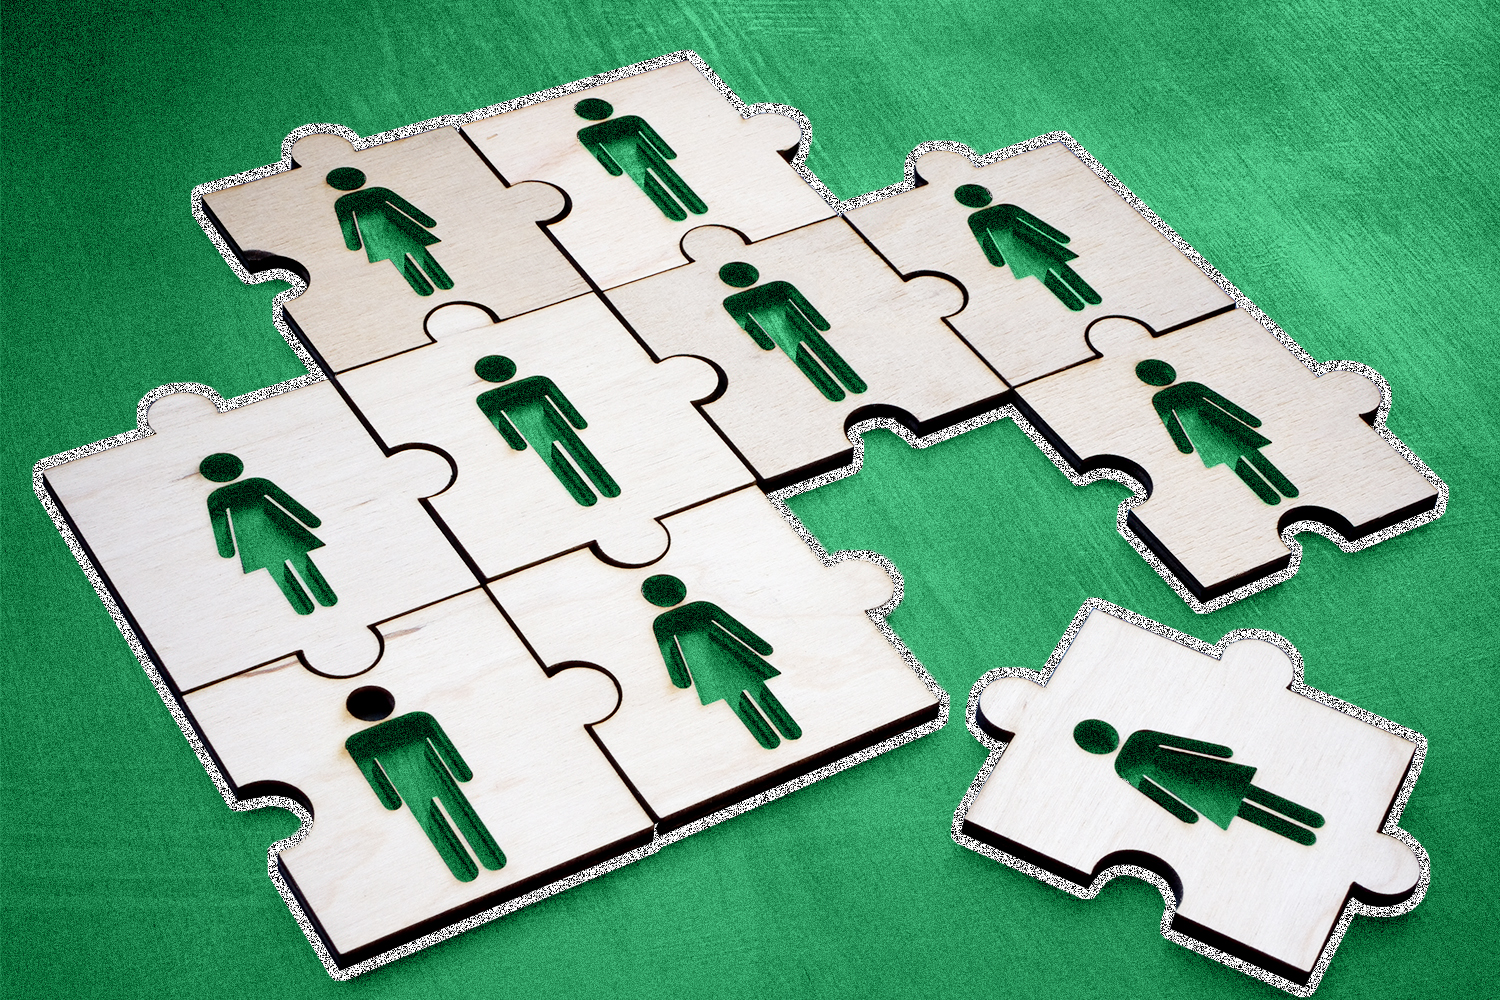 Puzzle pieces with people shapes on a green background